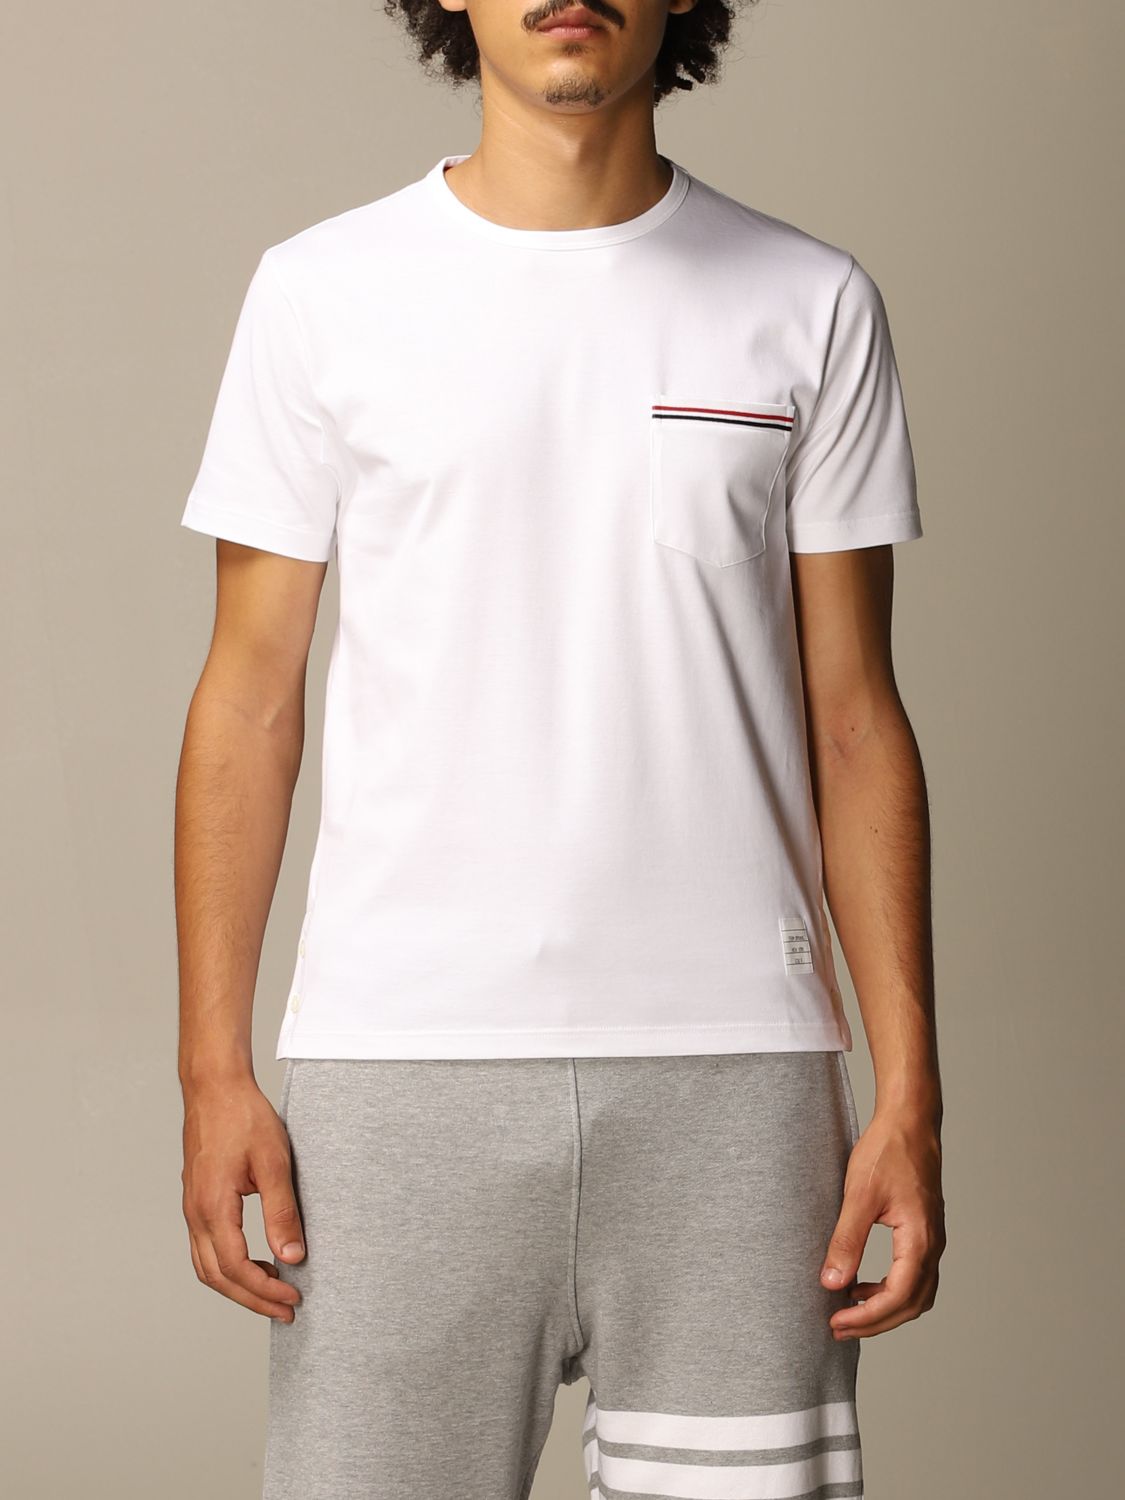 Thom Browne cotton T-shirt with striped band and pocket